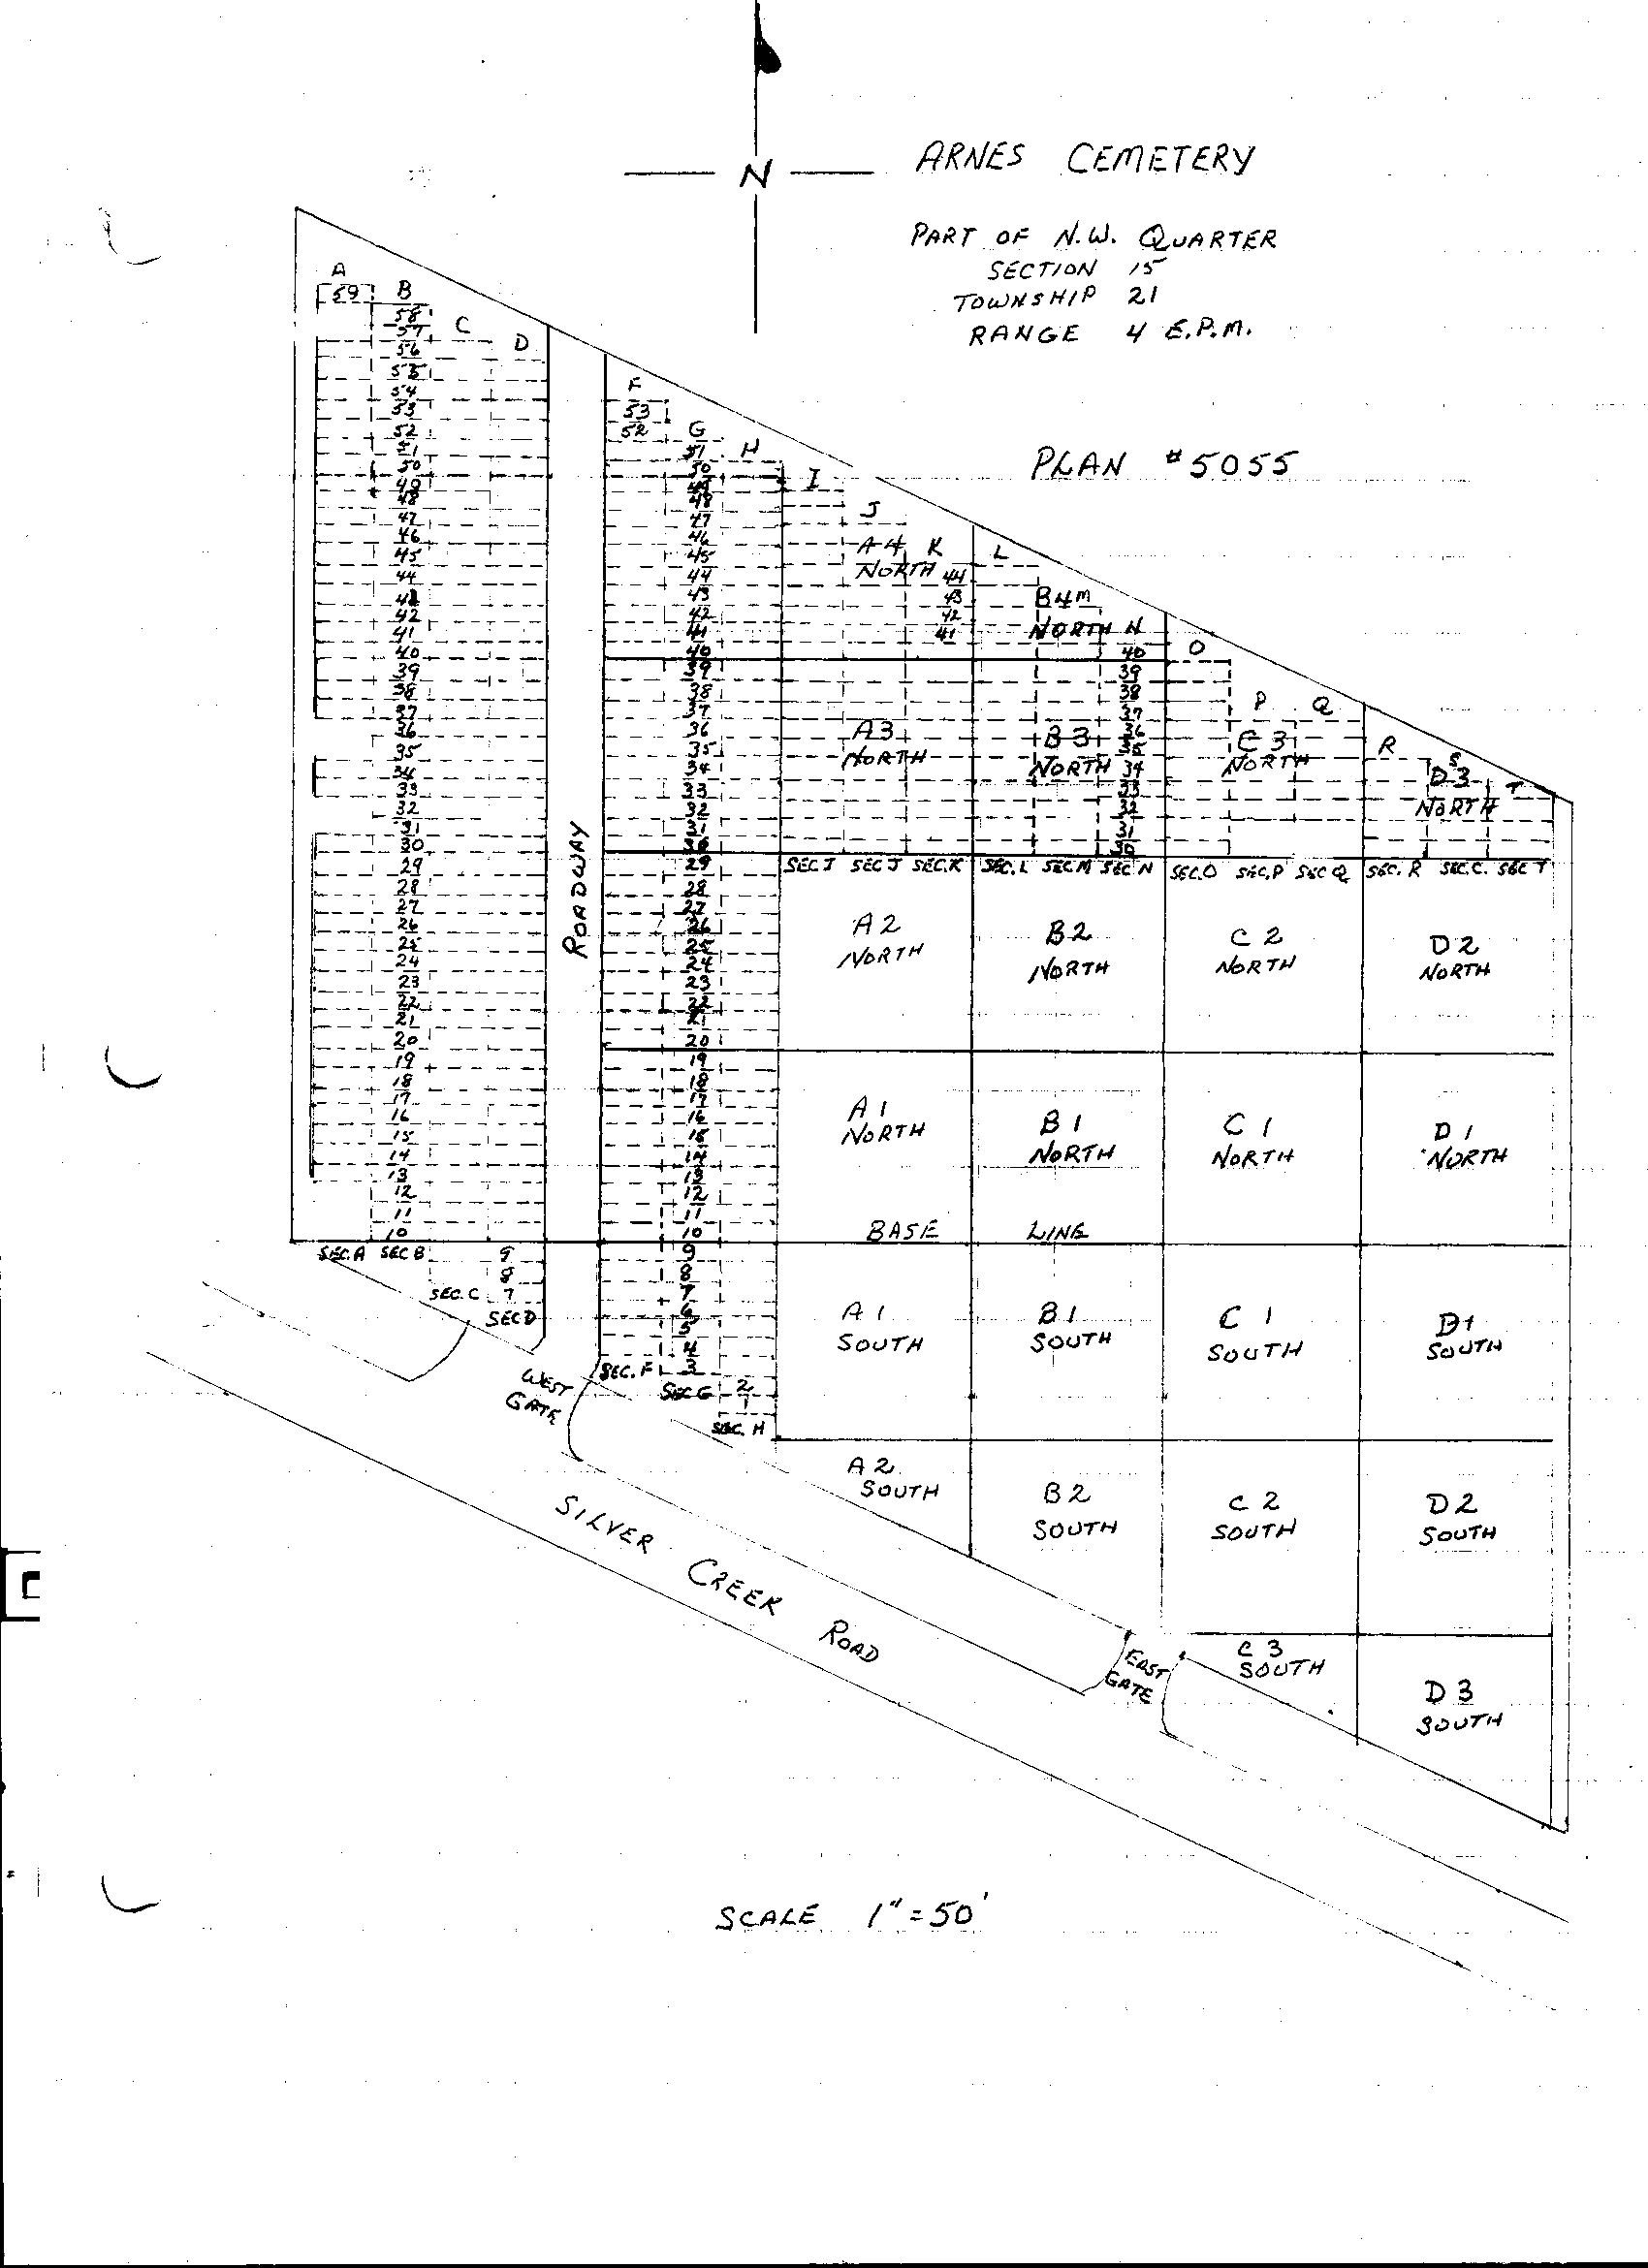 Survey of the Cemetery